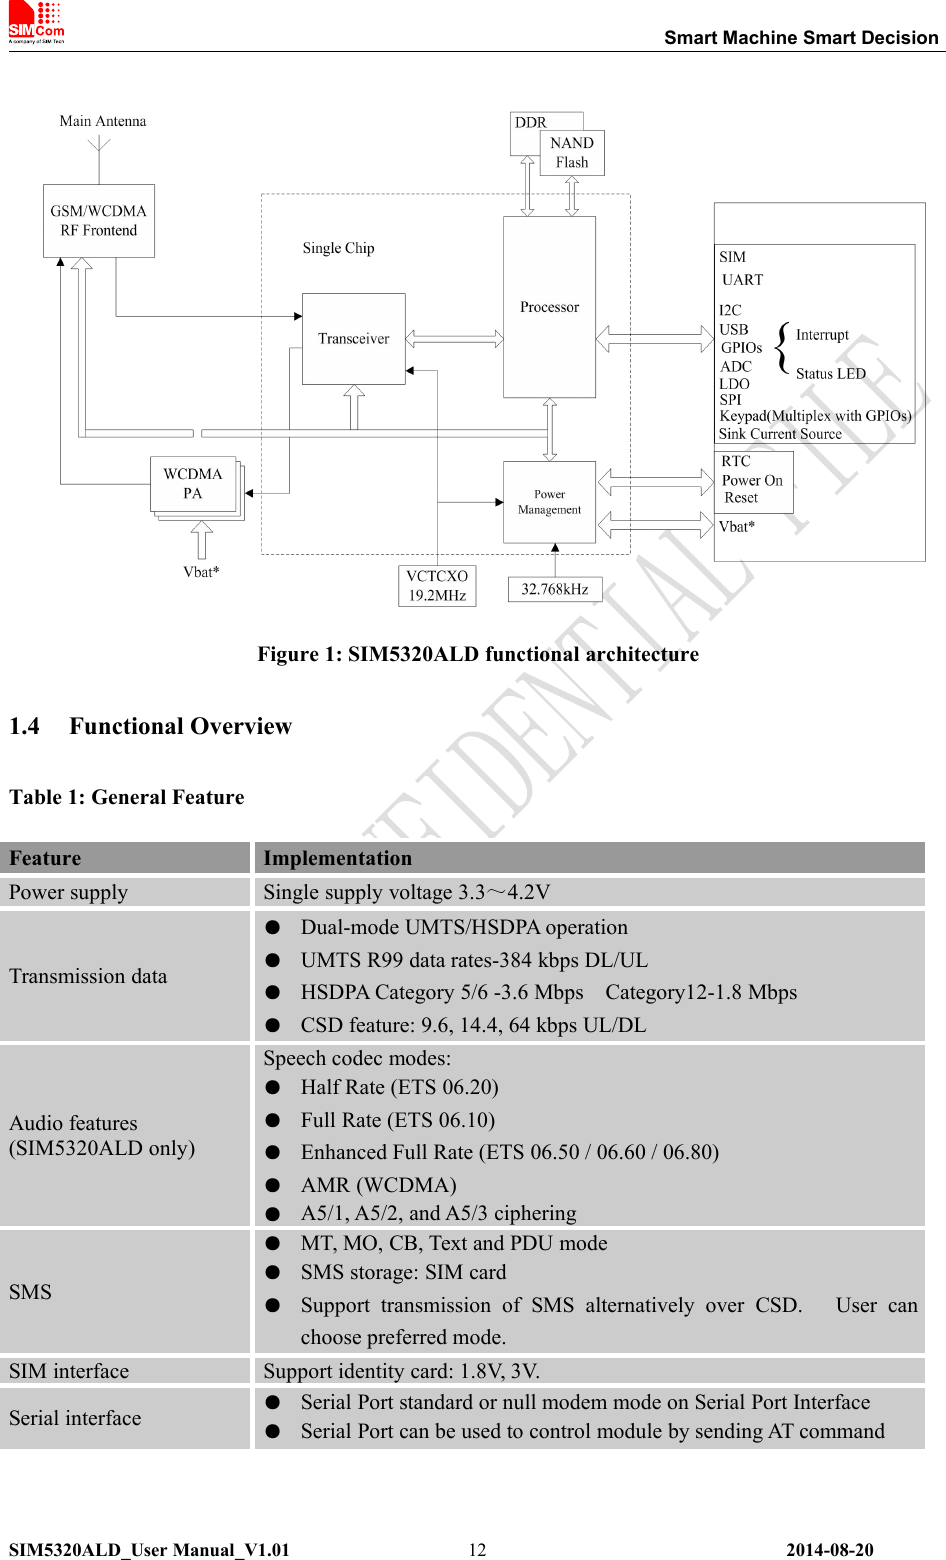 Smart Machine Smart DecisionSIM5320ALD_User Manual_V1.01 2014-08-2012Figure 1: SIM5320ALD functional architecture1.4 Functional OverviewTable 1: General FeatureFeature ImplementationPower supply Single supply voltage 3.3～4.2VTransmission data●Dual-mode UMTS/HSDPA operation●UMTS R99 data rates-384 kbps DL/UL●HSDPA Category 5/6 -3.6 Mbps Category12-1.8 Mbps●CSD feature: 9.6, 14.4, 64 kbps UL/DLAudio features(SIM5320ALD only)Speech codec modes:●Half Rate (ETS 06.20)●Full Rate (ETS 06.10)●Enhanced Full Rate (ETS 06.50 / 06.60 / 06.80)●AMR (WCDMA)●A5/1, A5/2, and A5/3 cipheringSMS●MT, MO, CB, Text and PDU mode●SMS storage: SIM card●Support transmission of SMS alternatively over CSD. User canchoose preferred mode.SIM interface Support identity card: 1.8V, 3V.Serial interface●Serial Port standard or null modem mode on Serial Port Interface●Serial Port can be used to control module by sending AT command